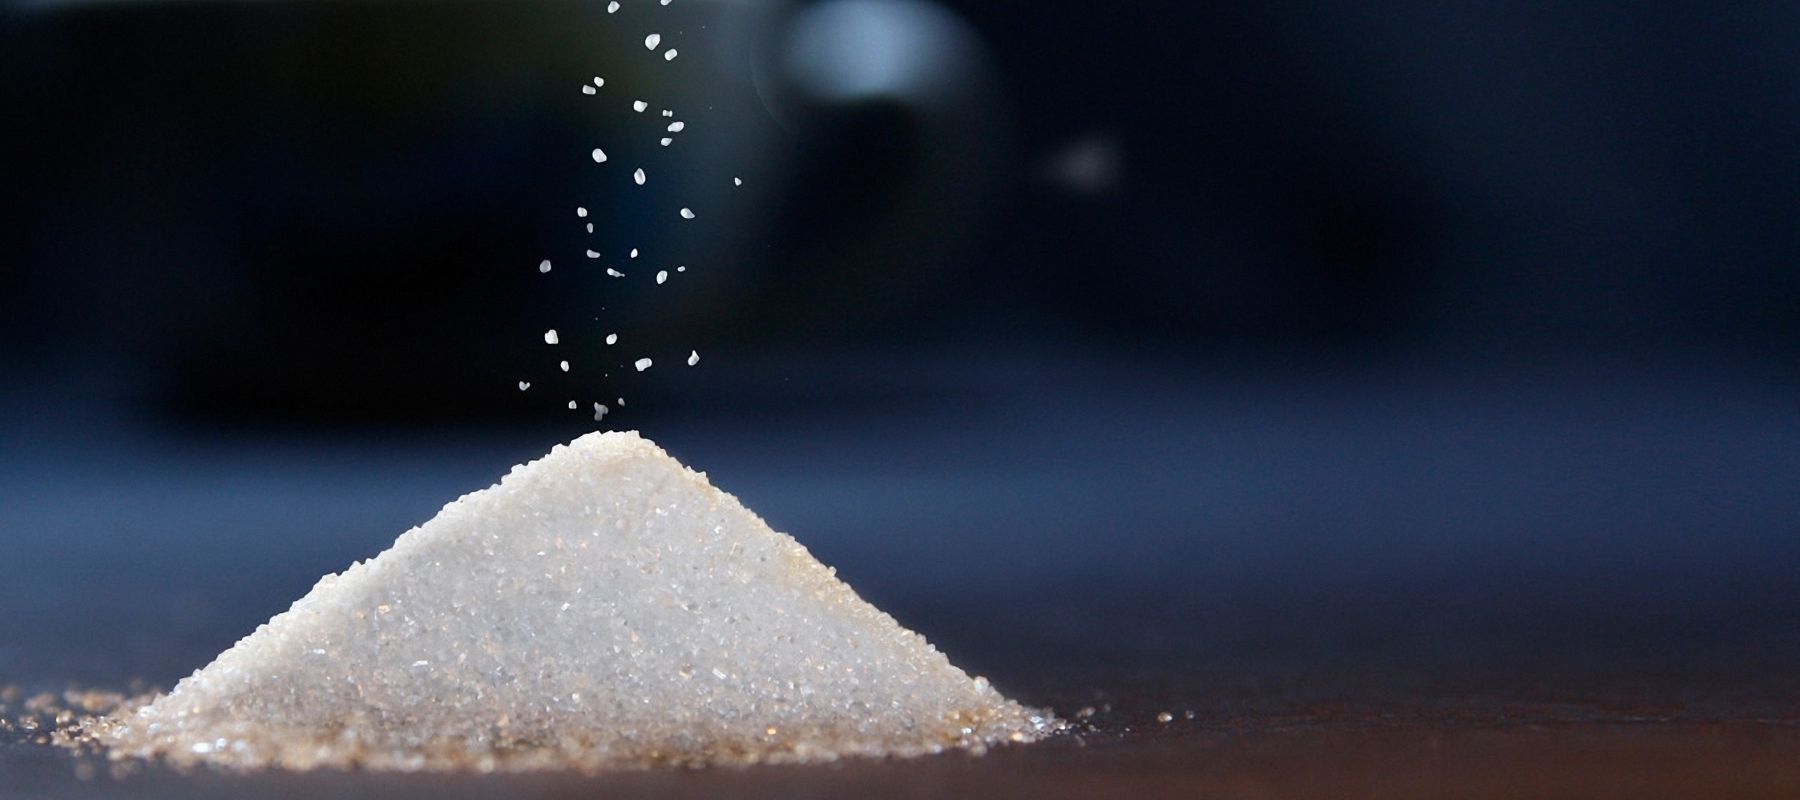 Refined sugar being sprinkled in top of a pile